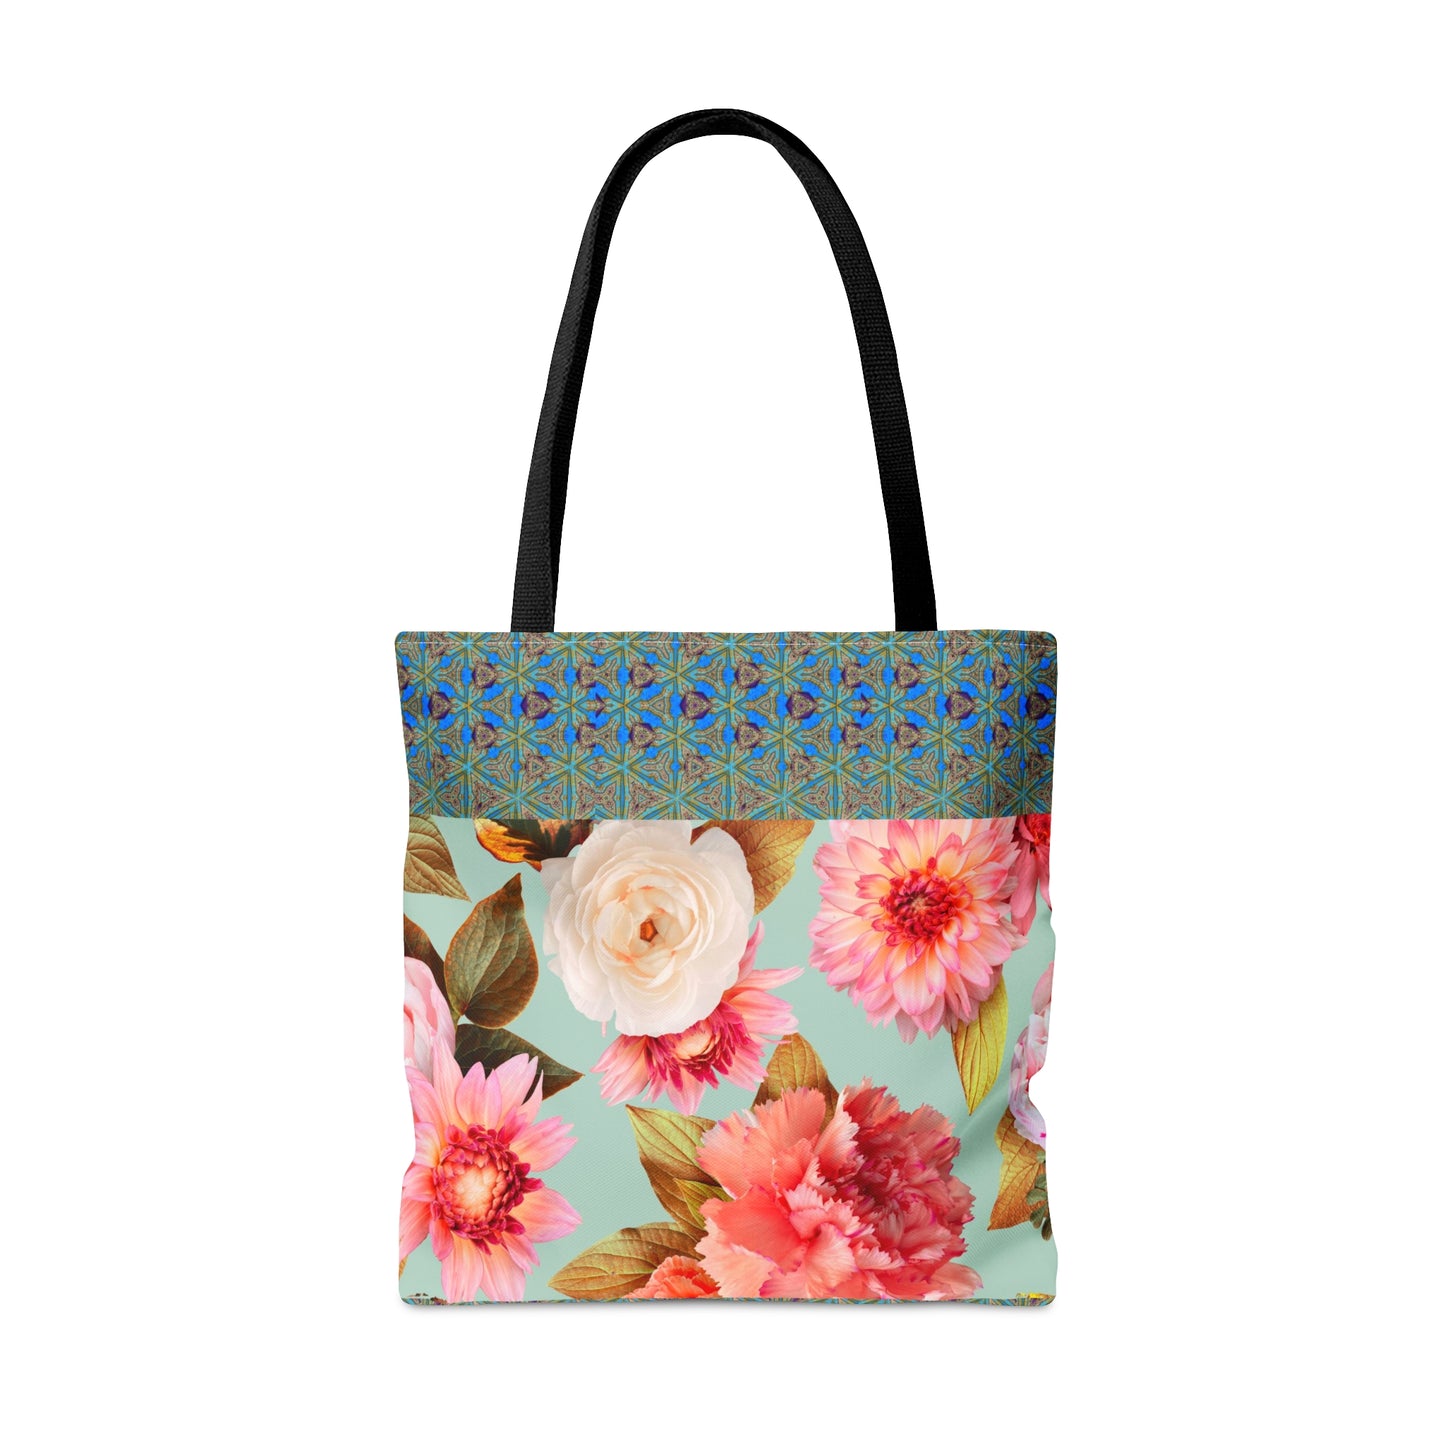 Chic Floral Tote Bag